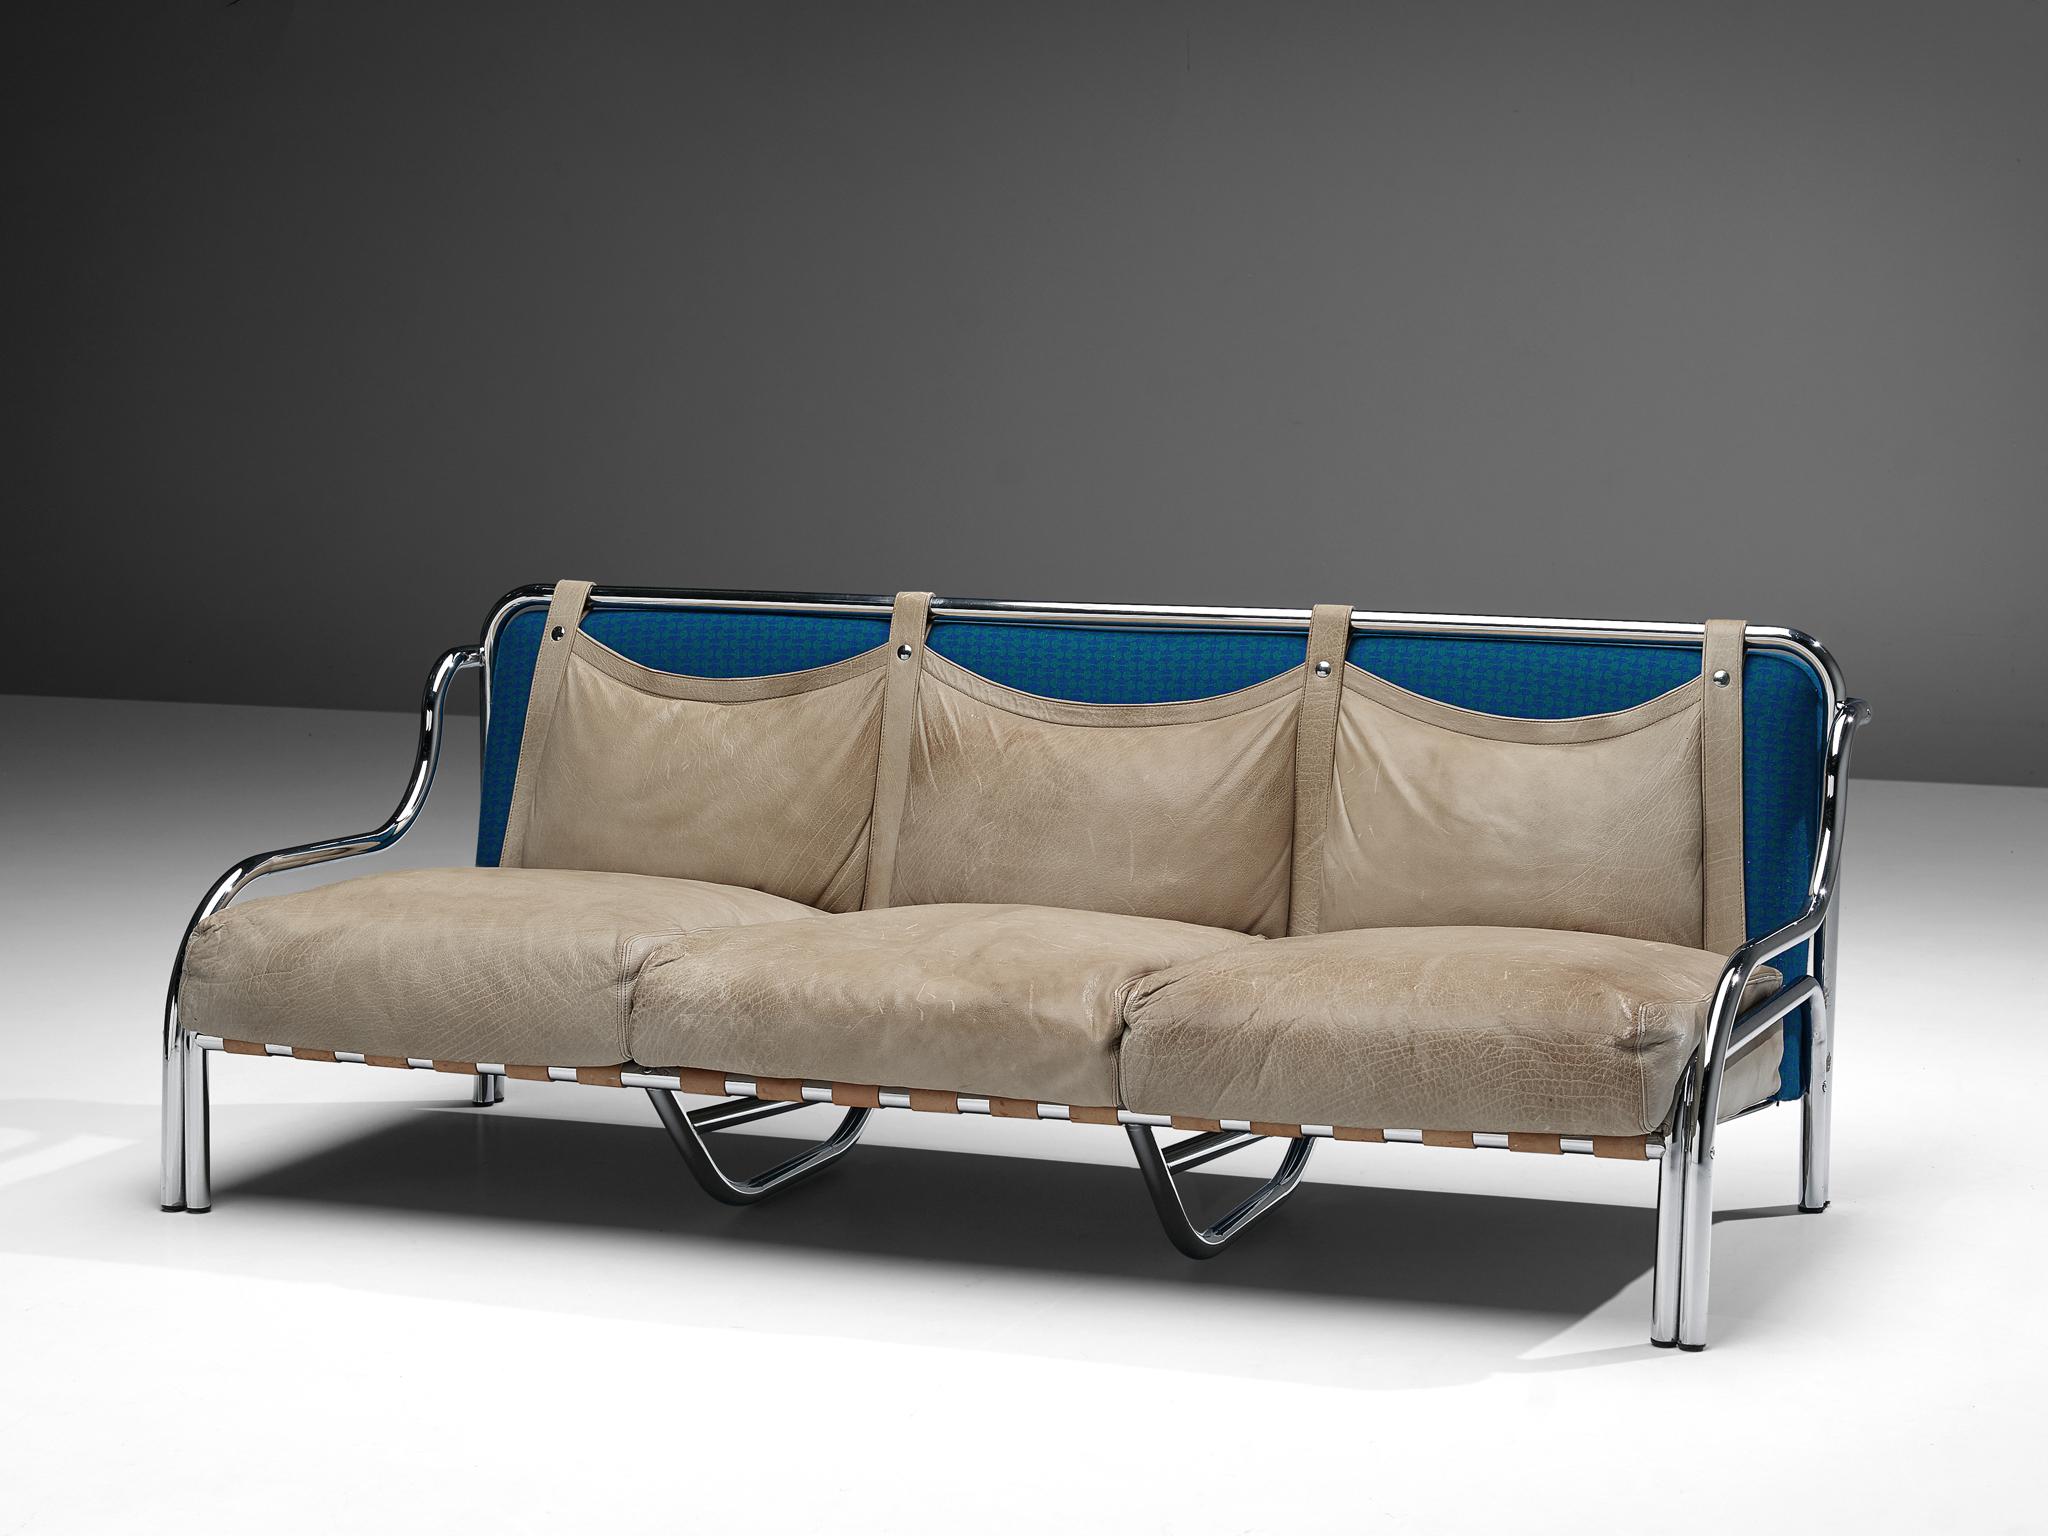 Gae Aulenti for Poltranova, sofa model 'Stringa', leather, chromed metal, blue fabric upholstery, Italy, 1962

'Stringa' sofa designed by Gae Aulenti for Poltranova in 1962. A tubular chrome frame with strong proportions and curves holds the leather